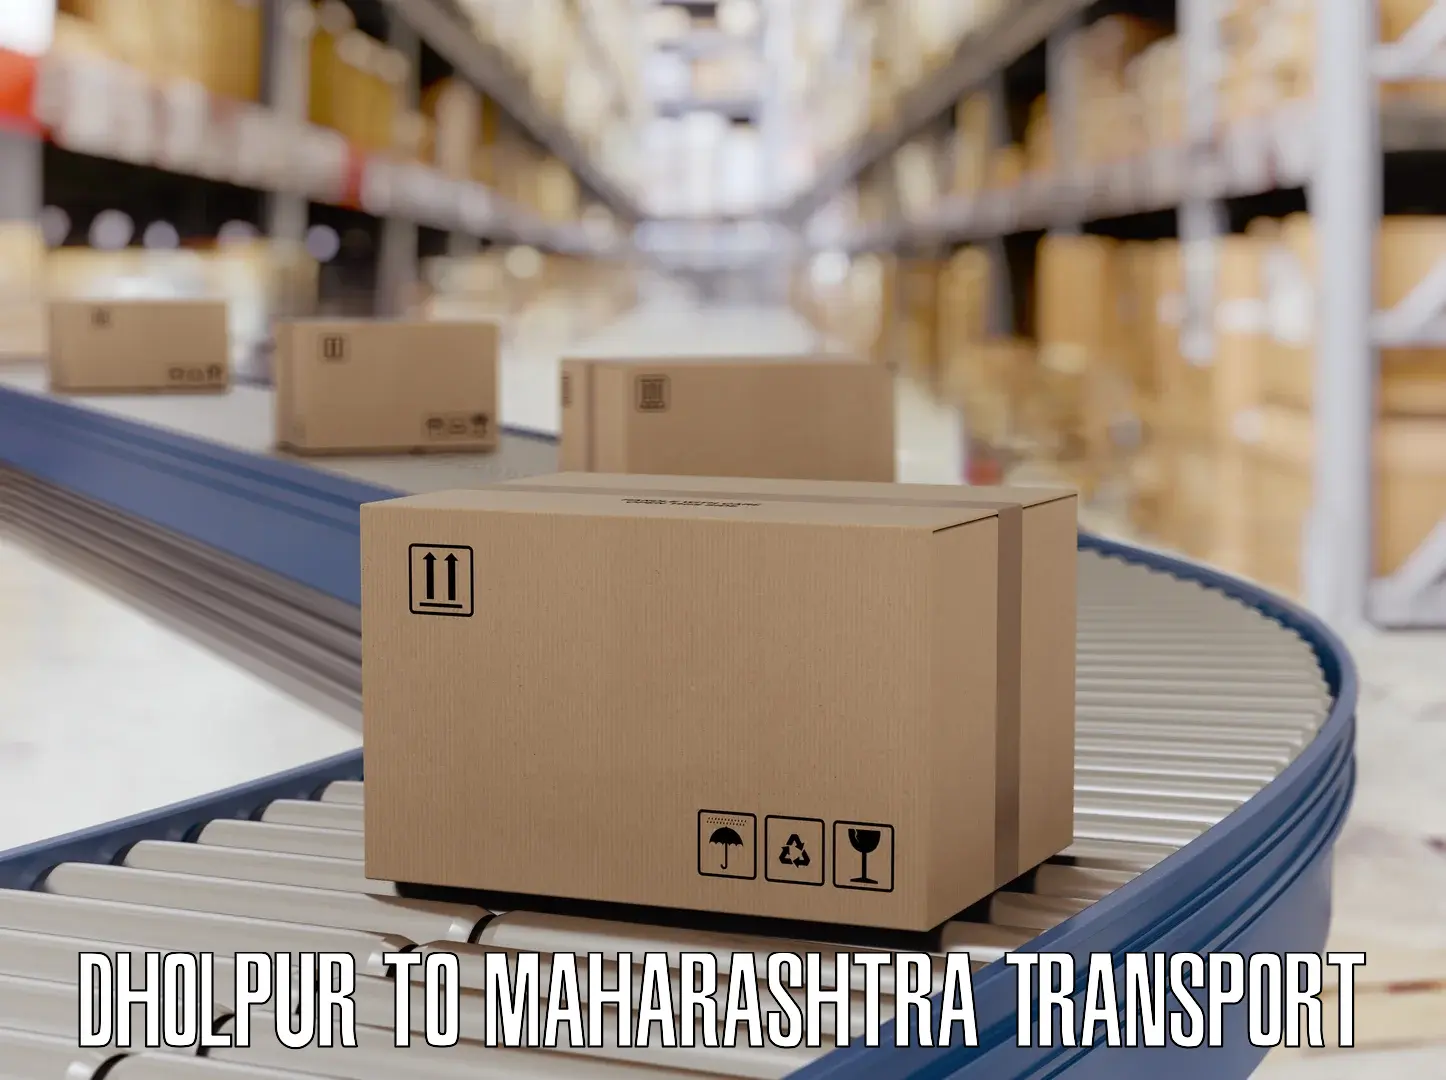 Truck transport companies in India Dholpur to Maharashtra